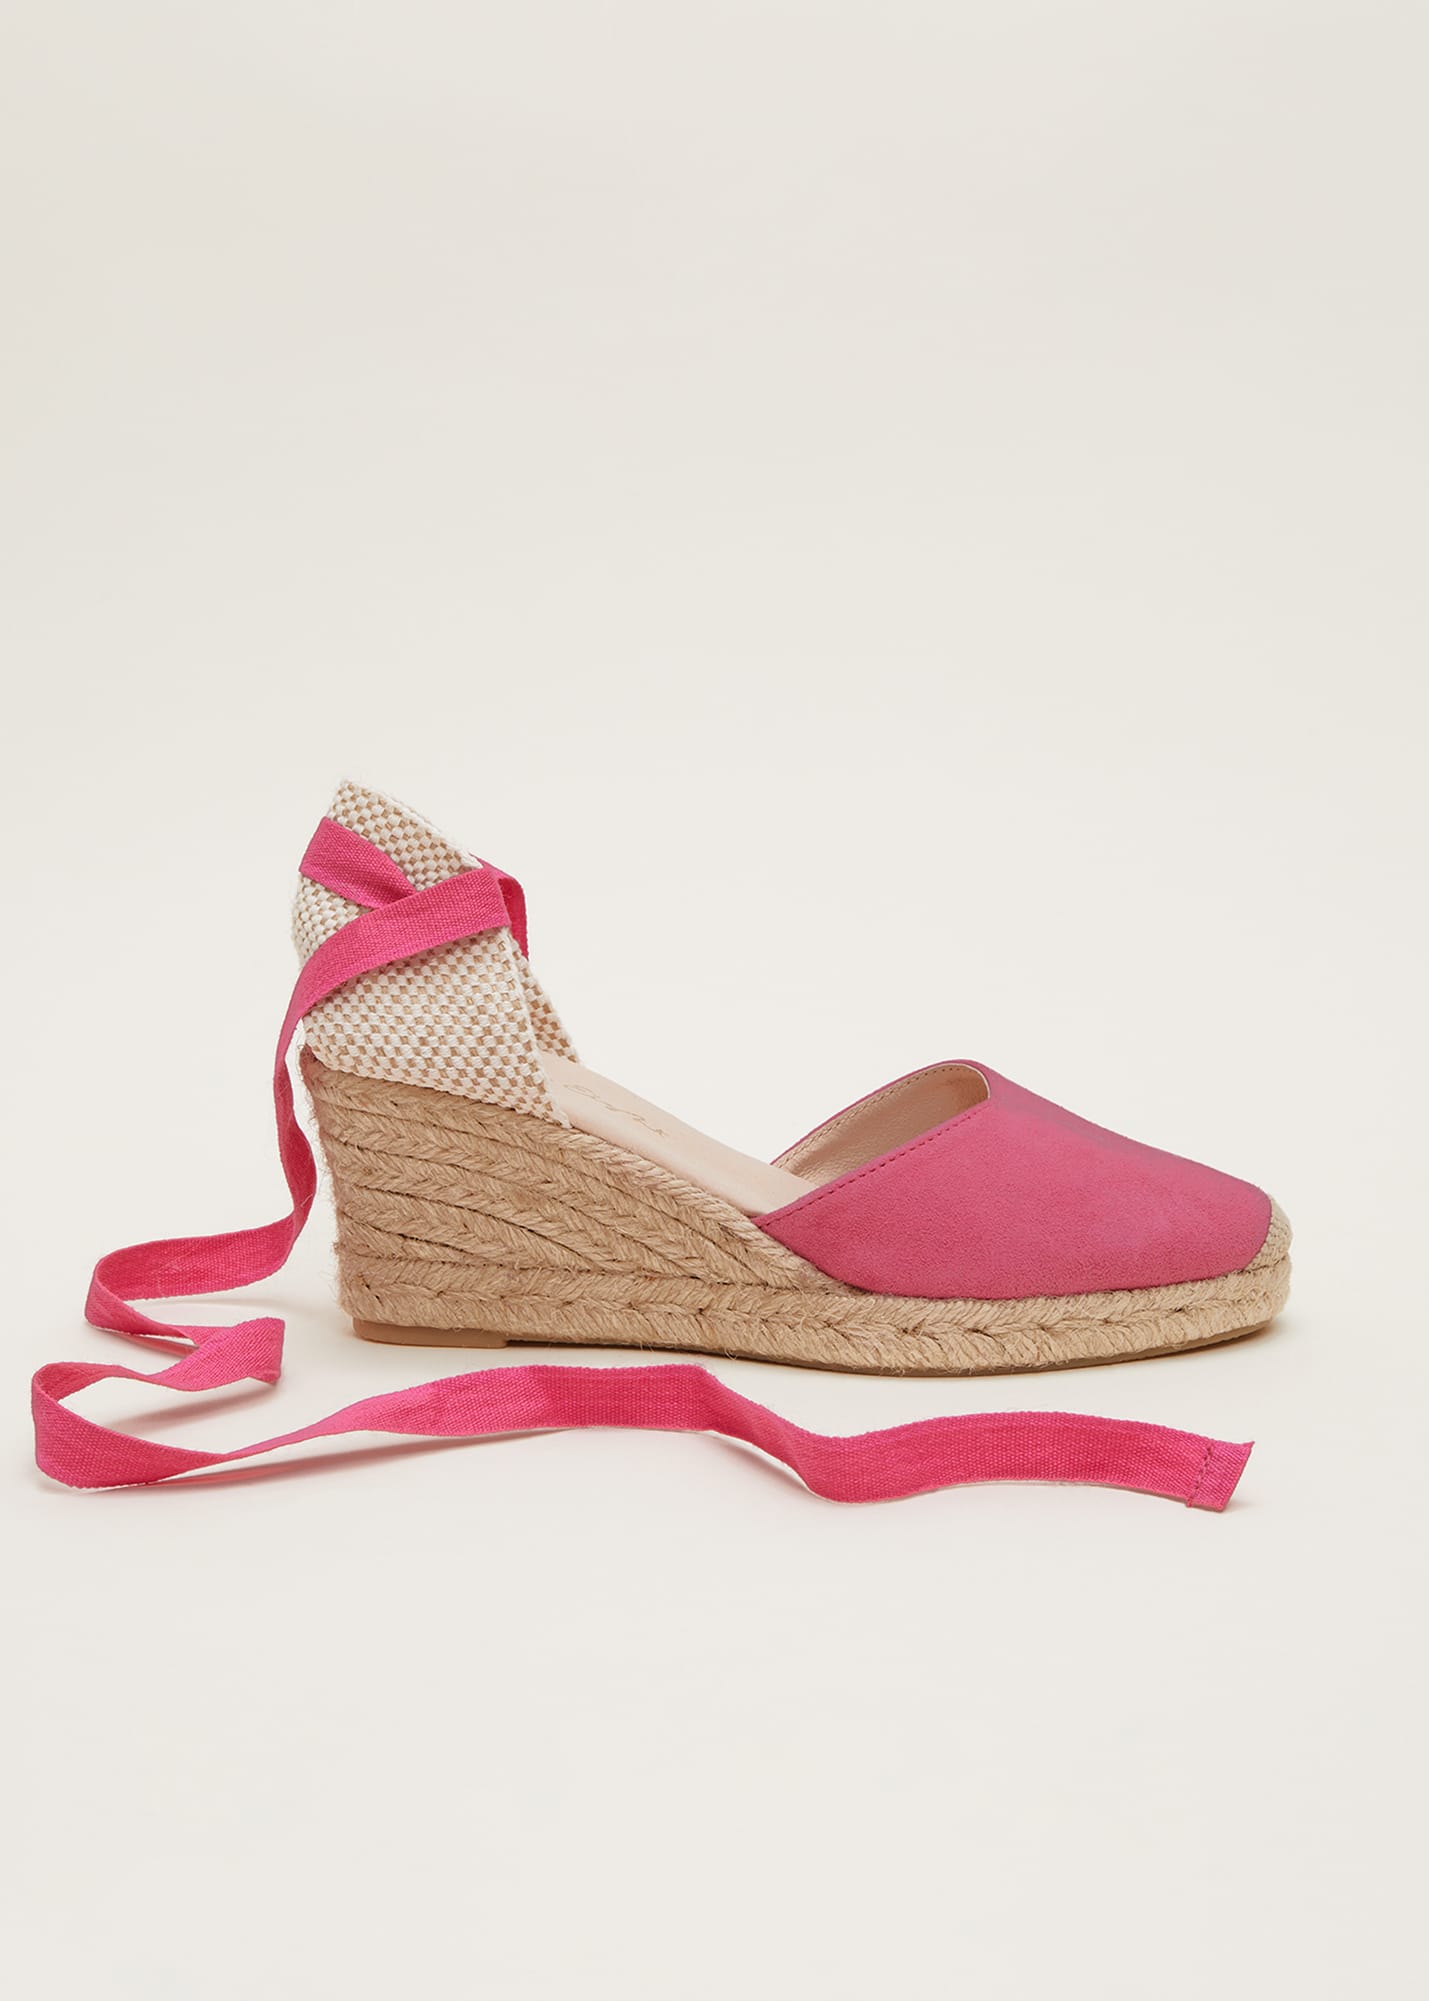 Phase Eight Women's Suede Ankle Tie Espadrille Shoes